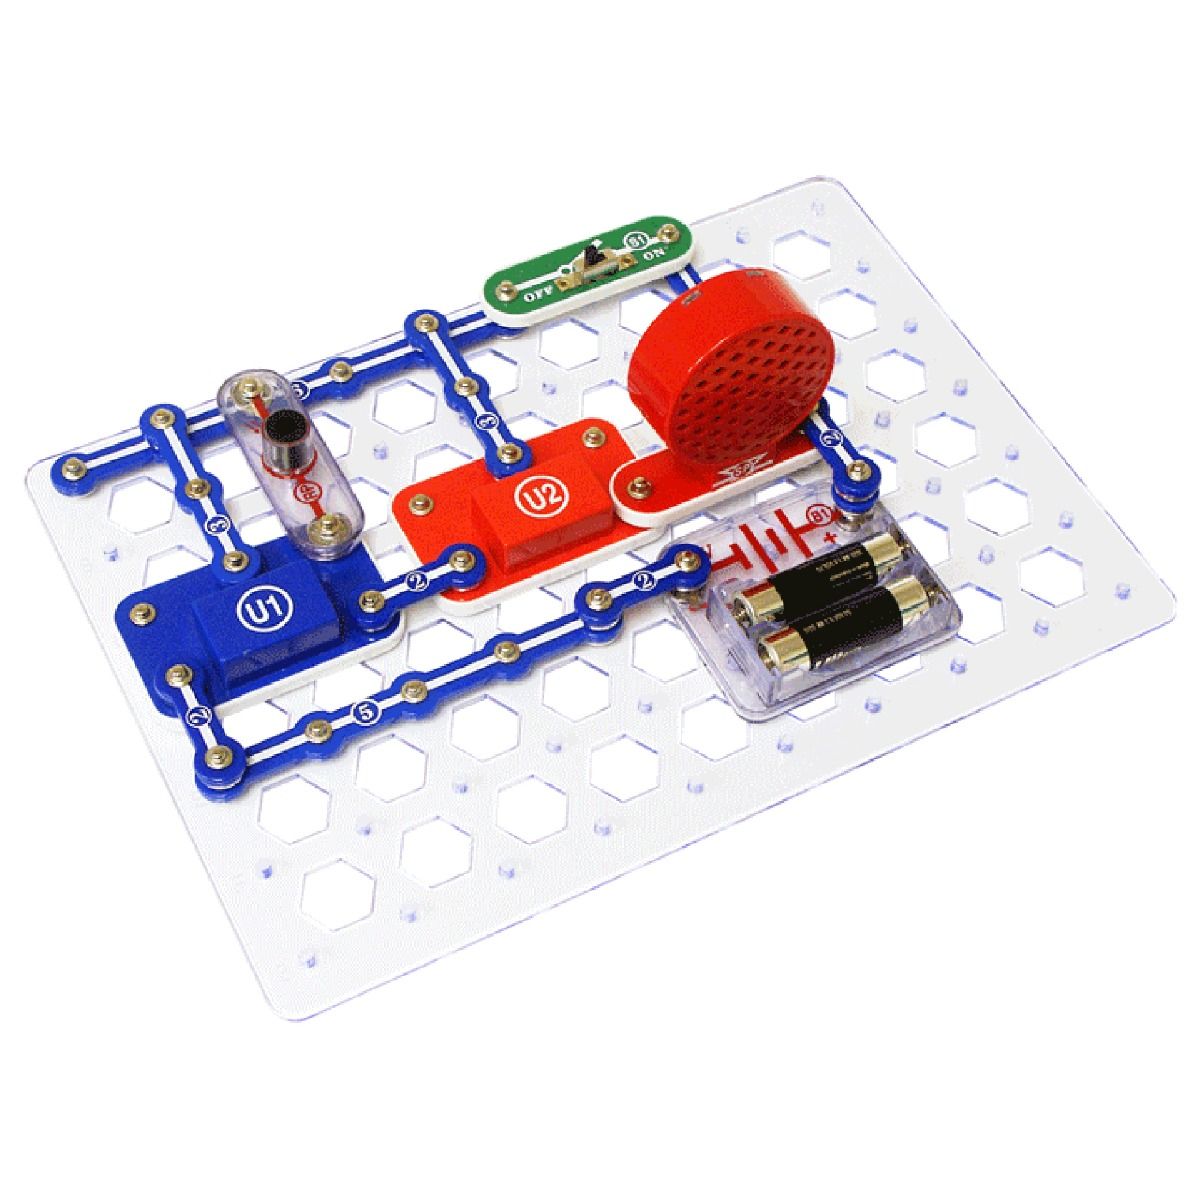 Snap Circuits Beginner – Child's Play